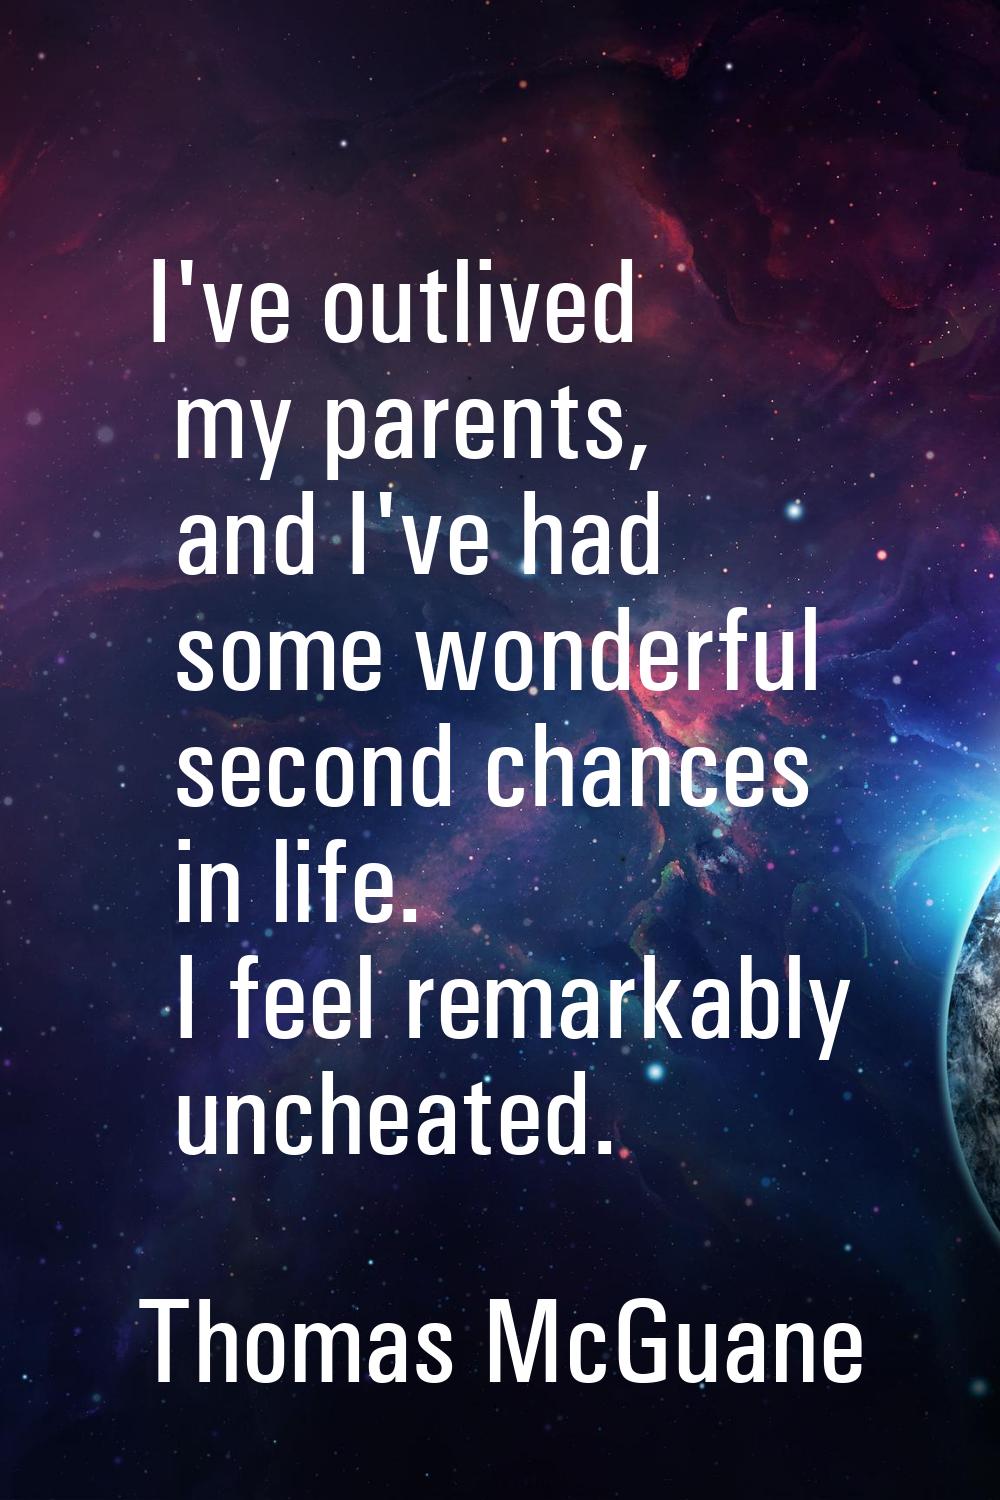 I've outlived my parents, and I've had some wonderful second chances in life. I feel remarkably unc